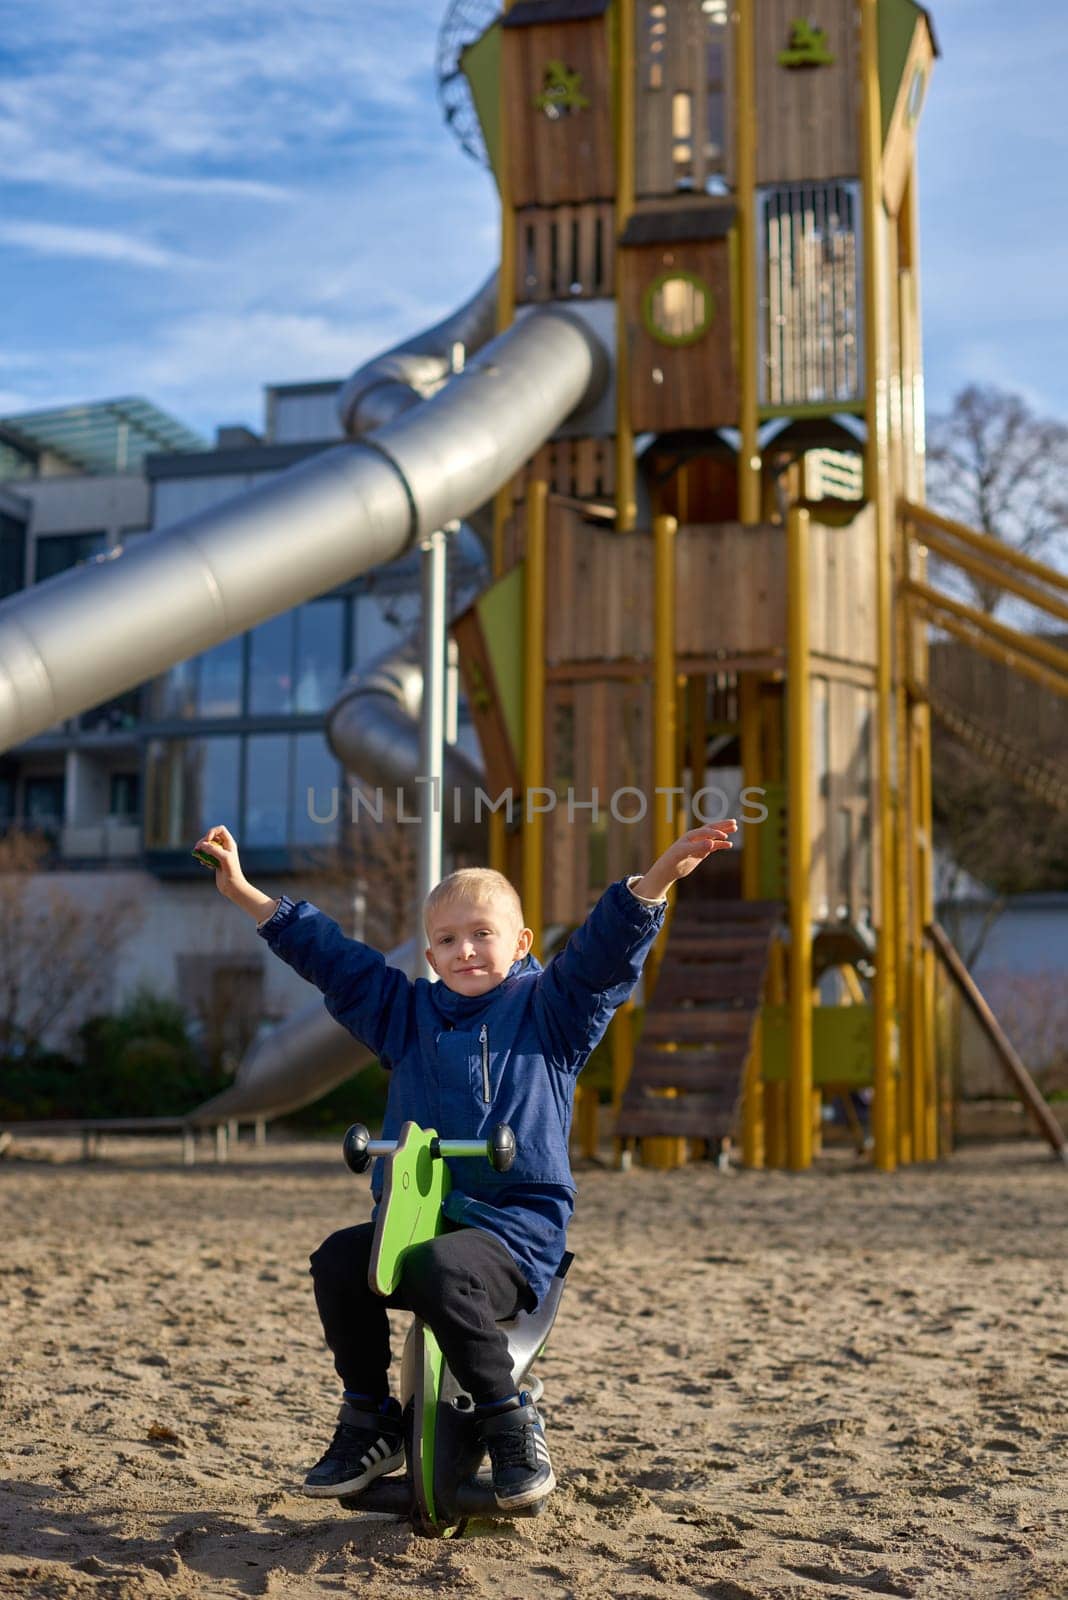 Childhood Joy: Beautiful 8-Year-Old Boy in Jacket Swinging on Horse-Shaped Seesaw, Background of Playful Park in Bietigheim-Bissingen, Germany, Autumn by Andrii_Ko